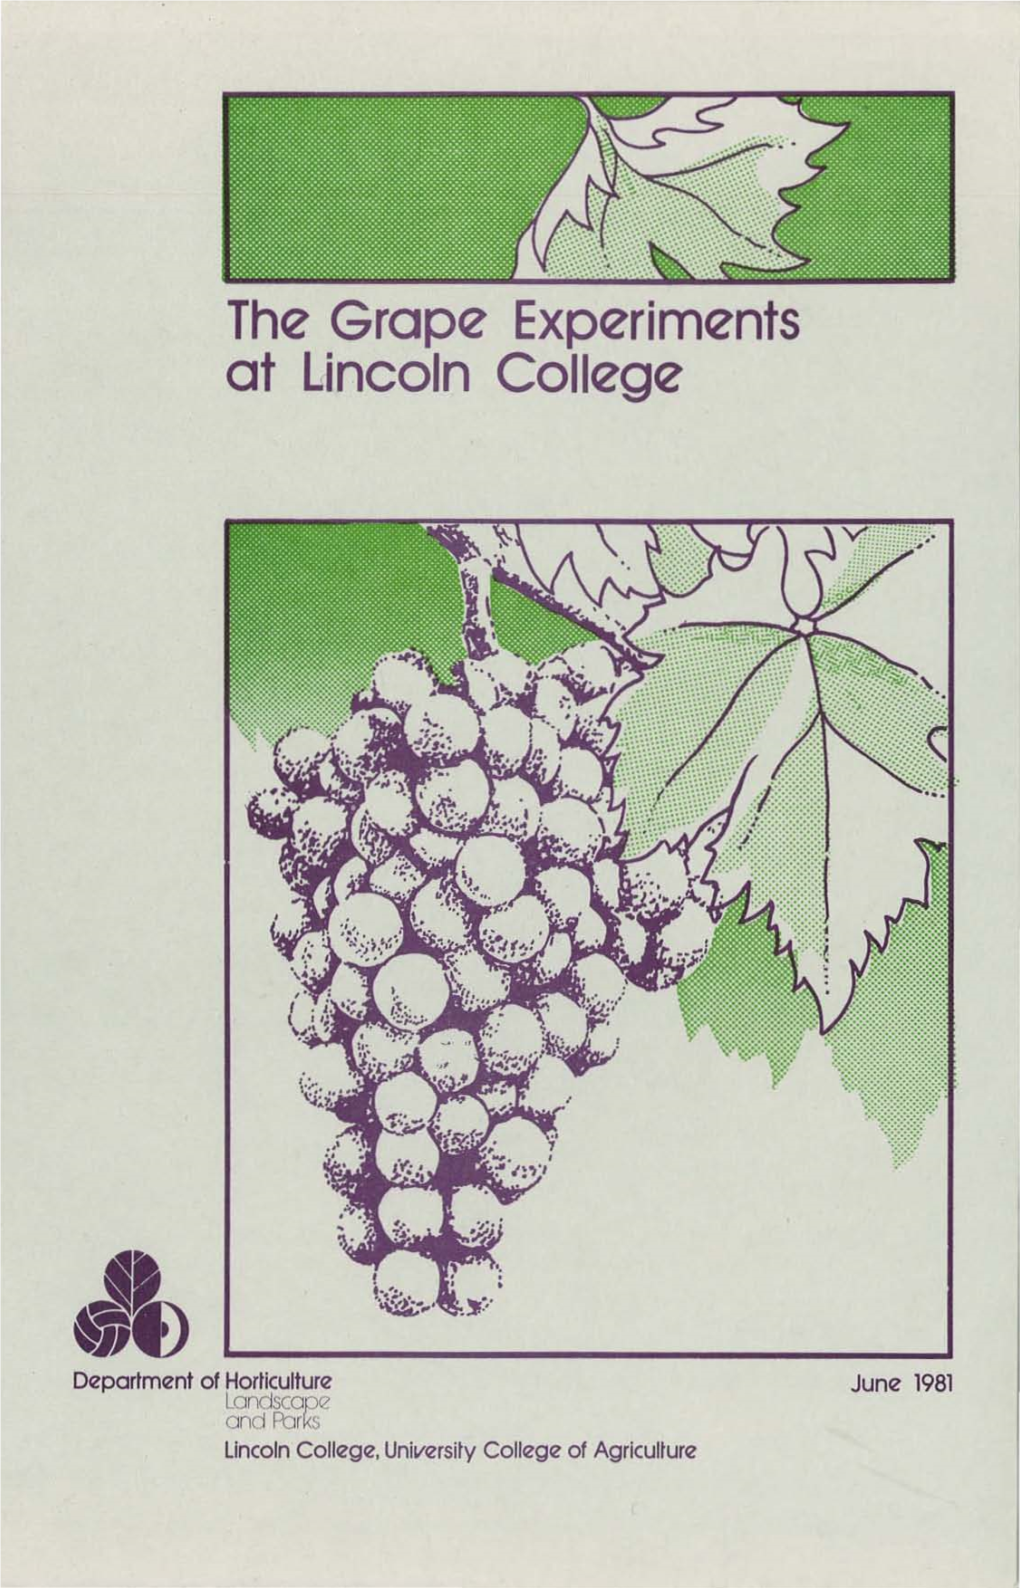 The Grape Experiments at Lincoln College